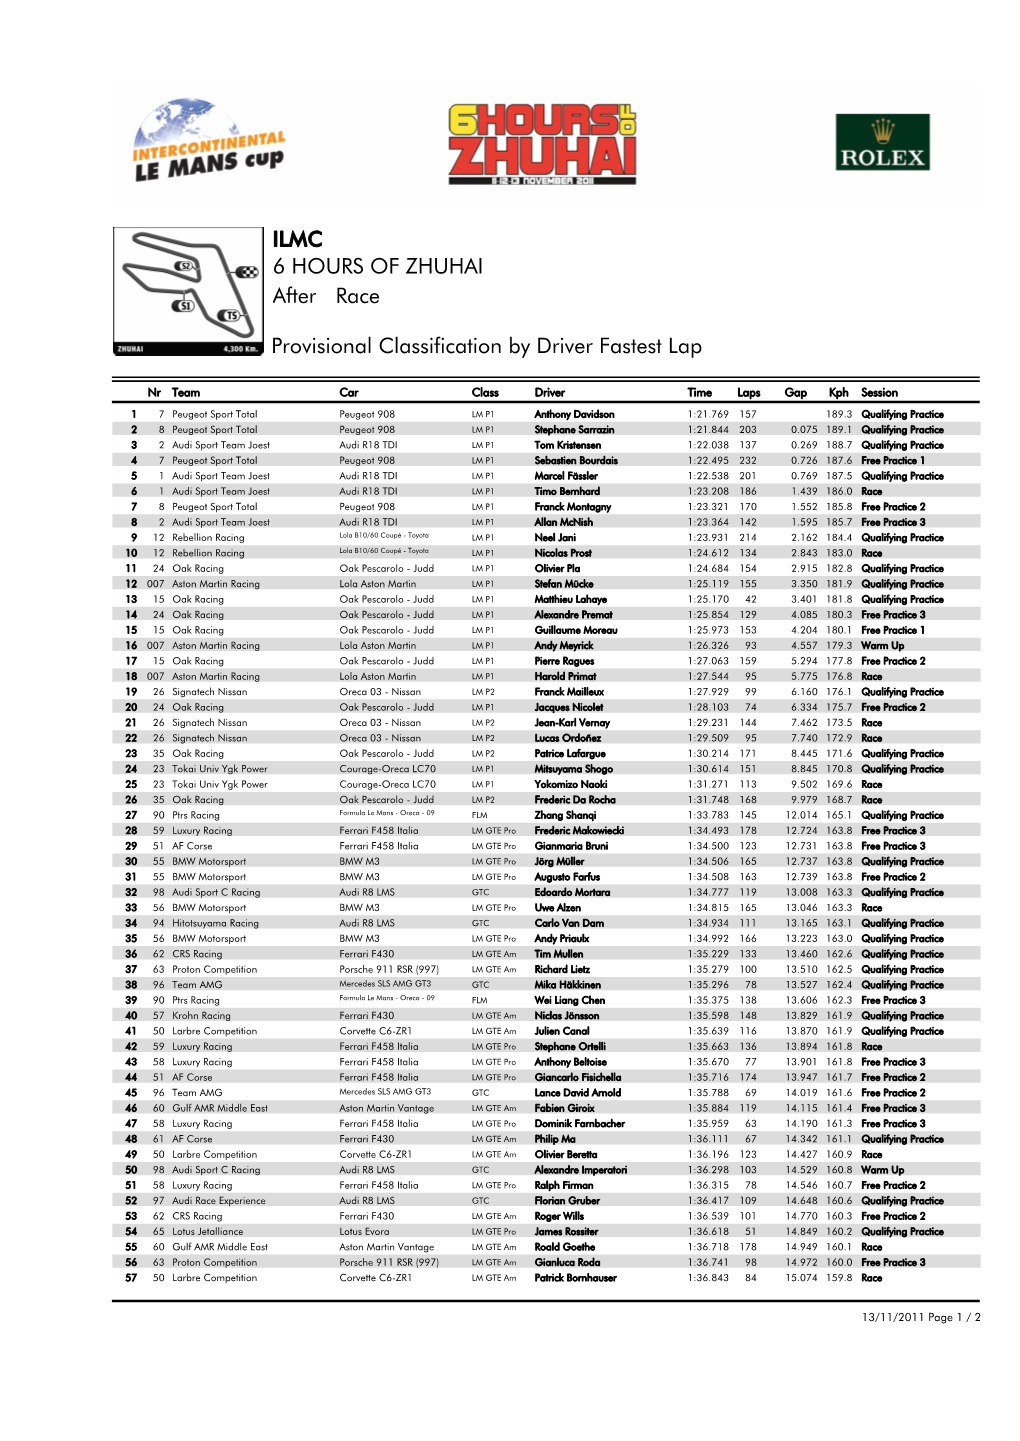 Race 6 HOURS of ZHUHAI ILMC After Provisional Classification By